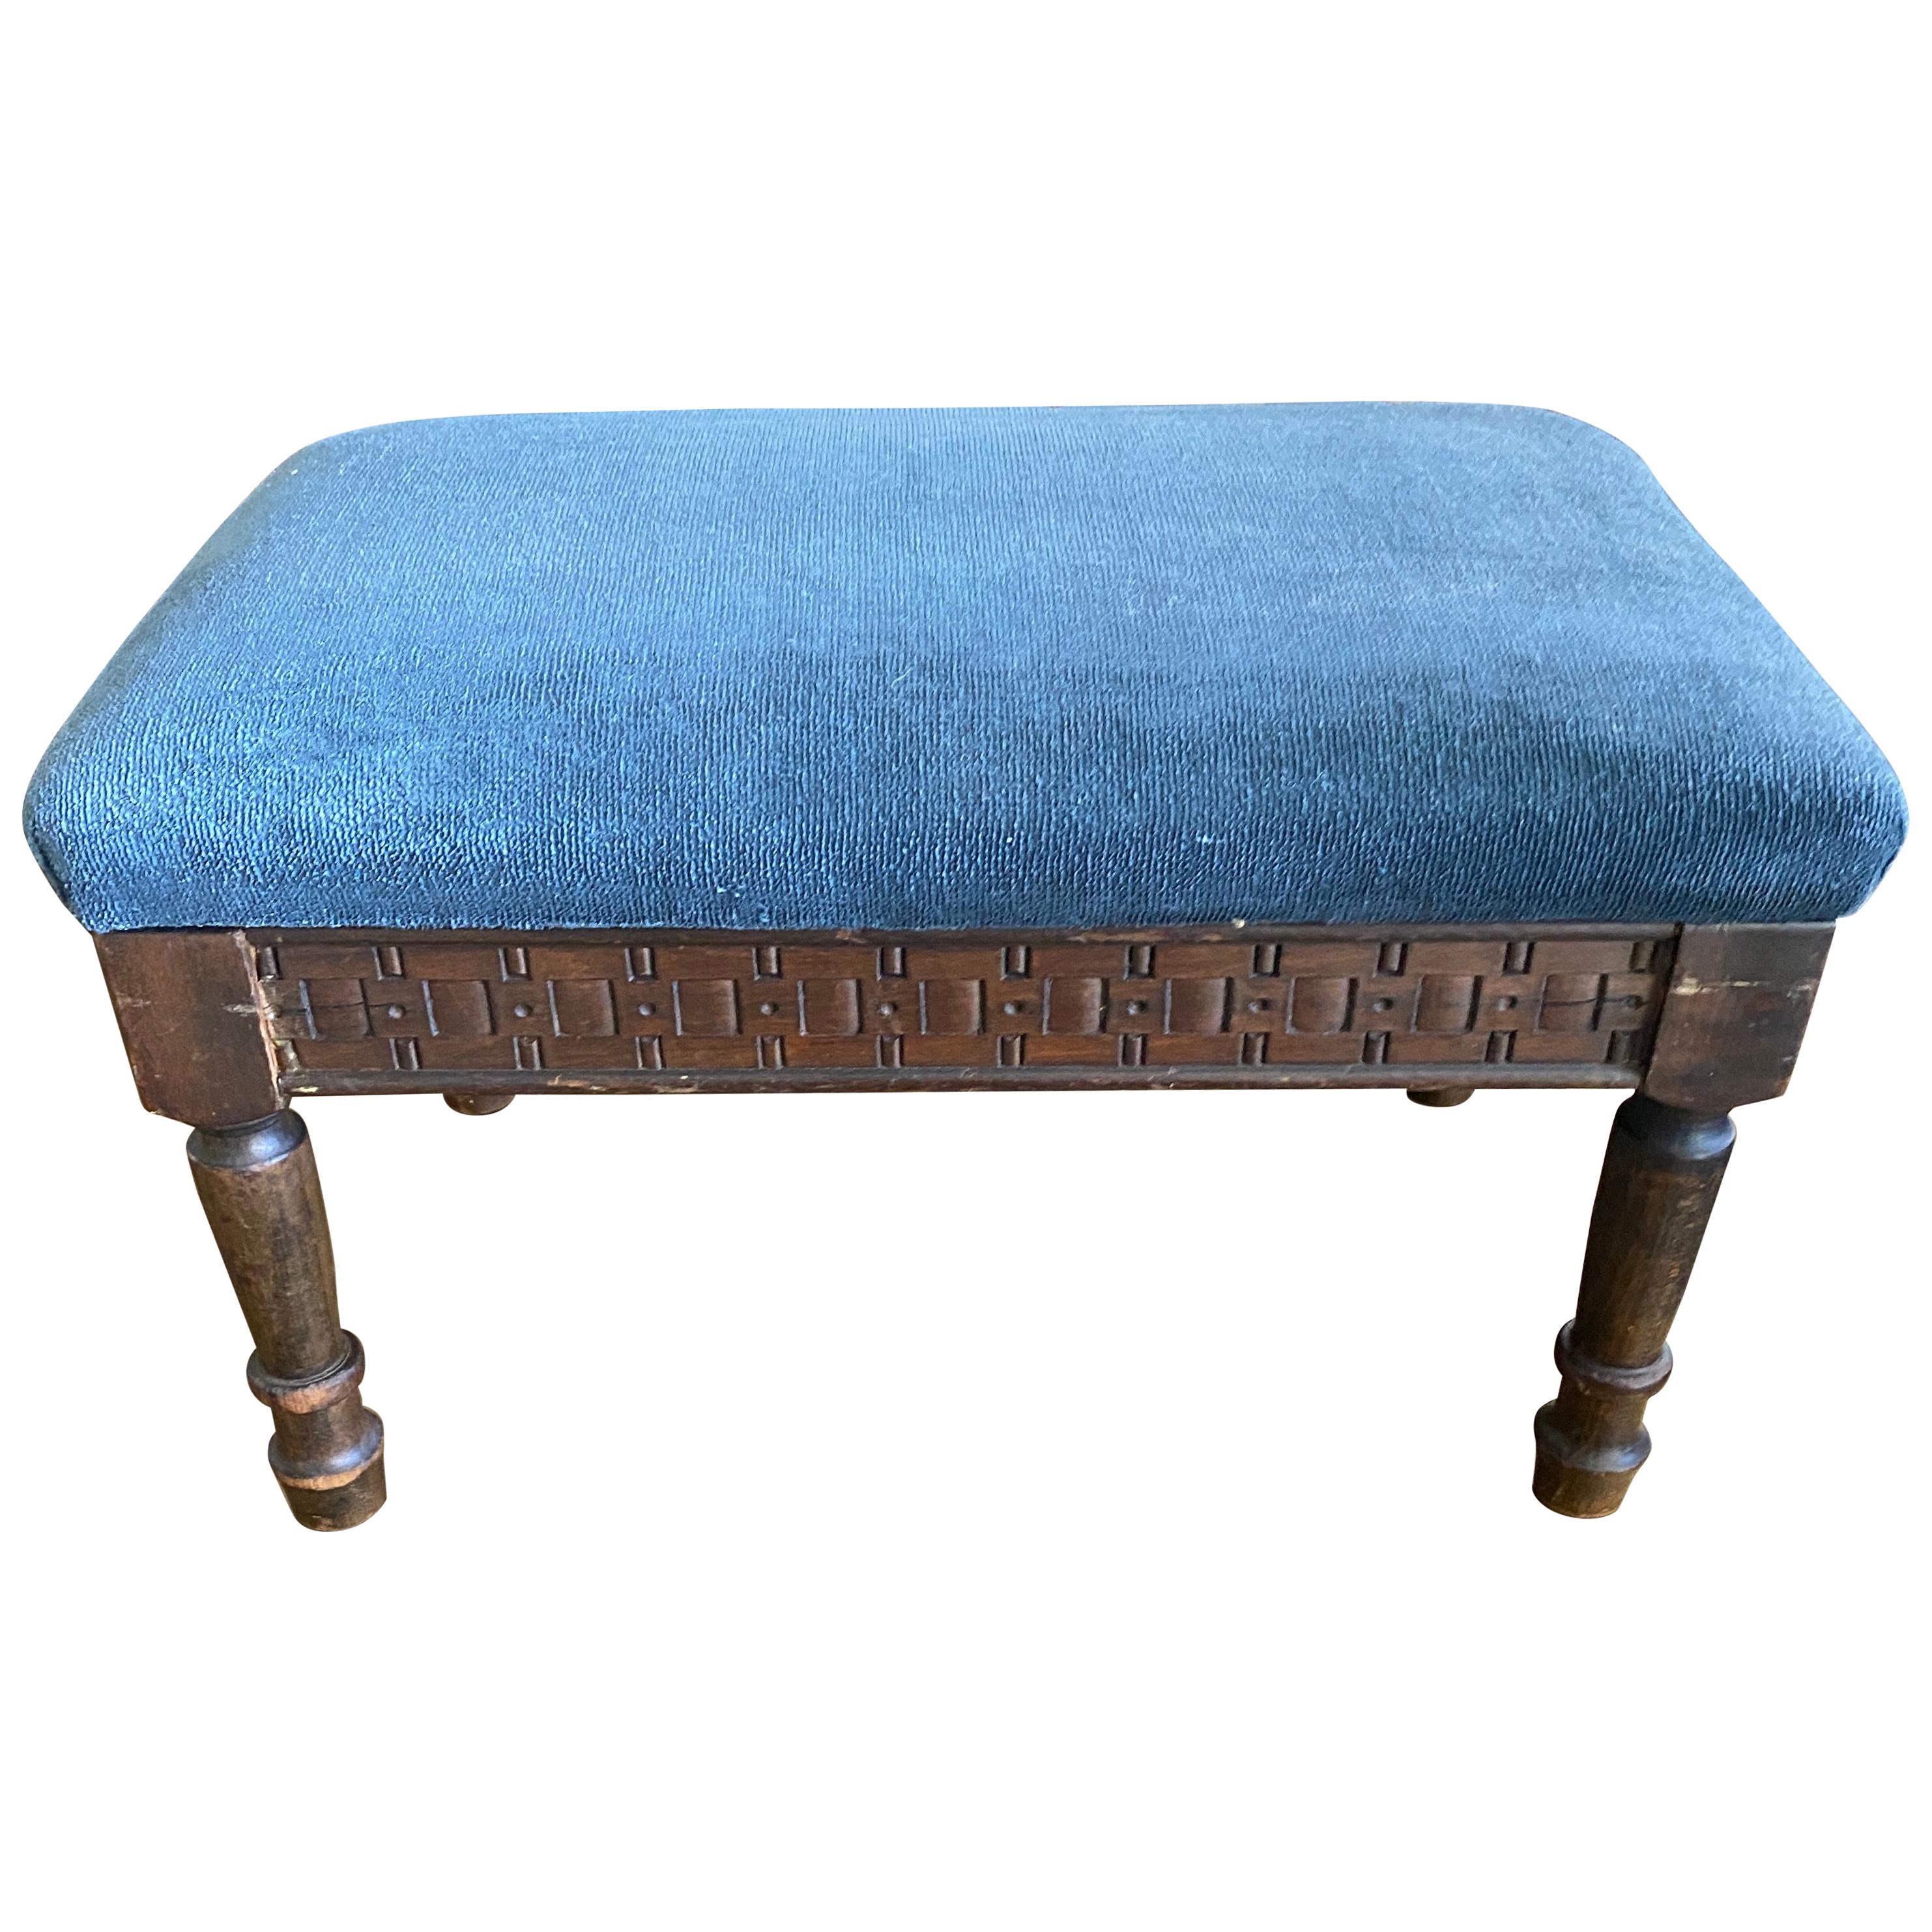 Petite Antique Carved Wood Low Footstool For Sale